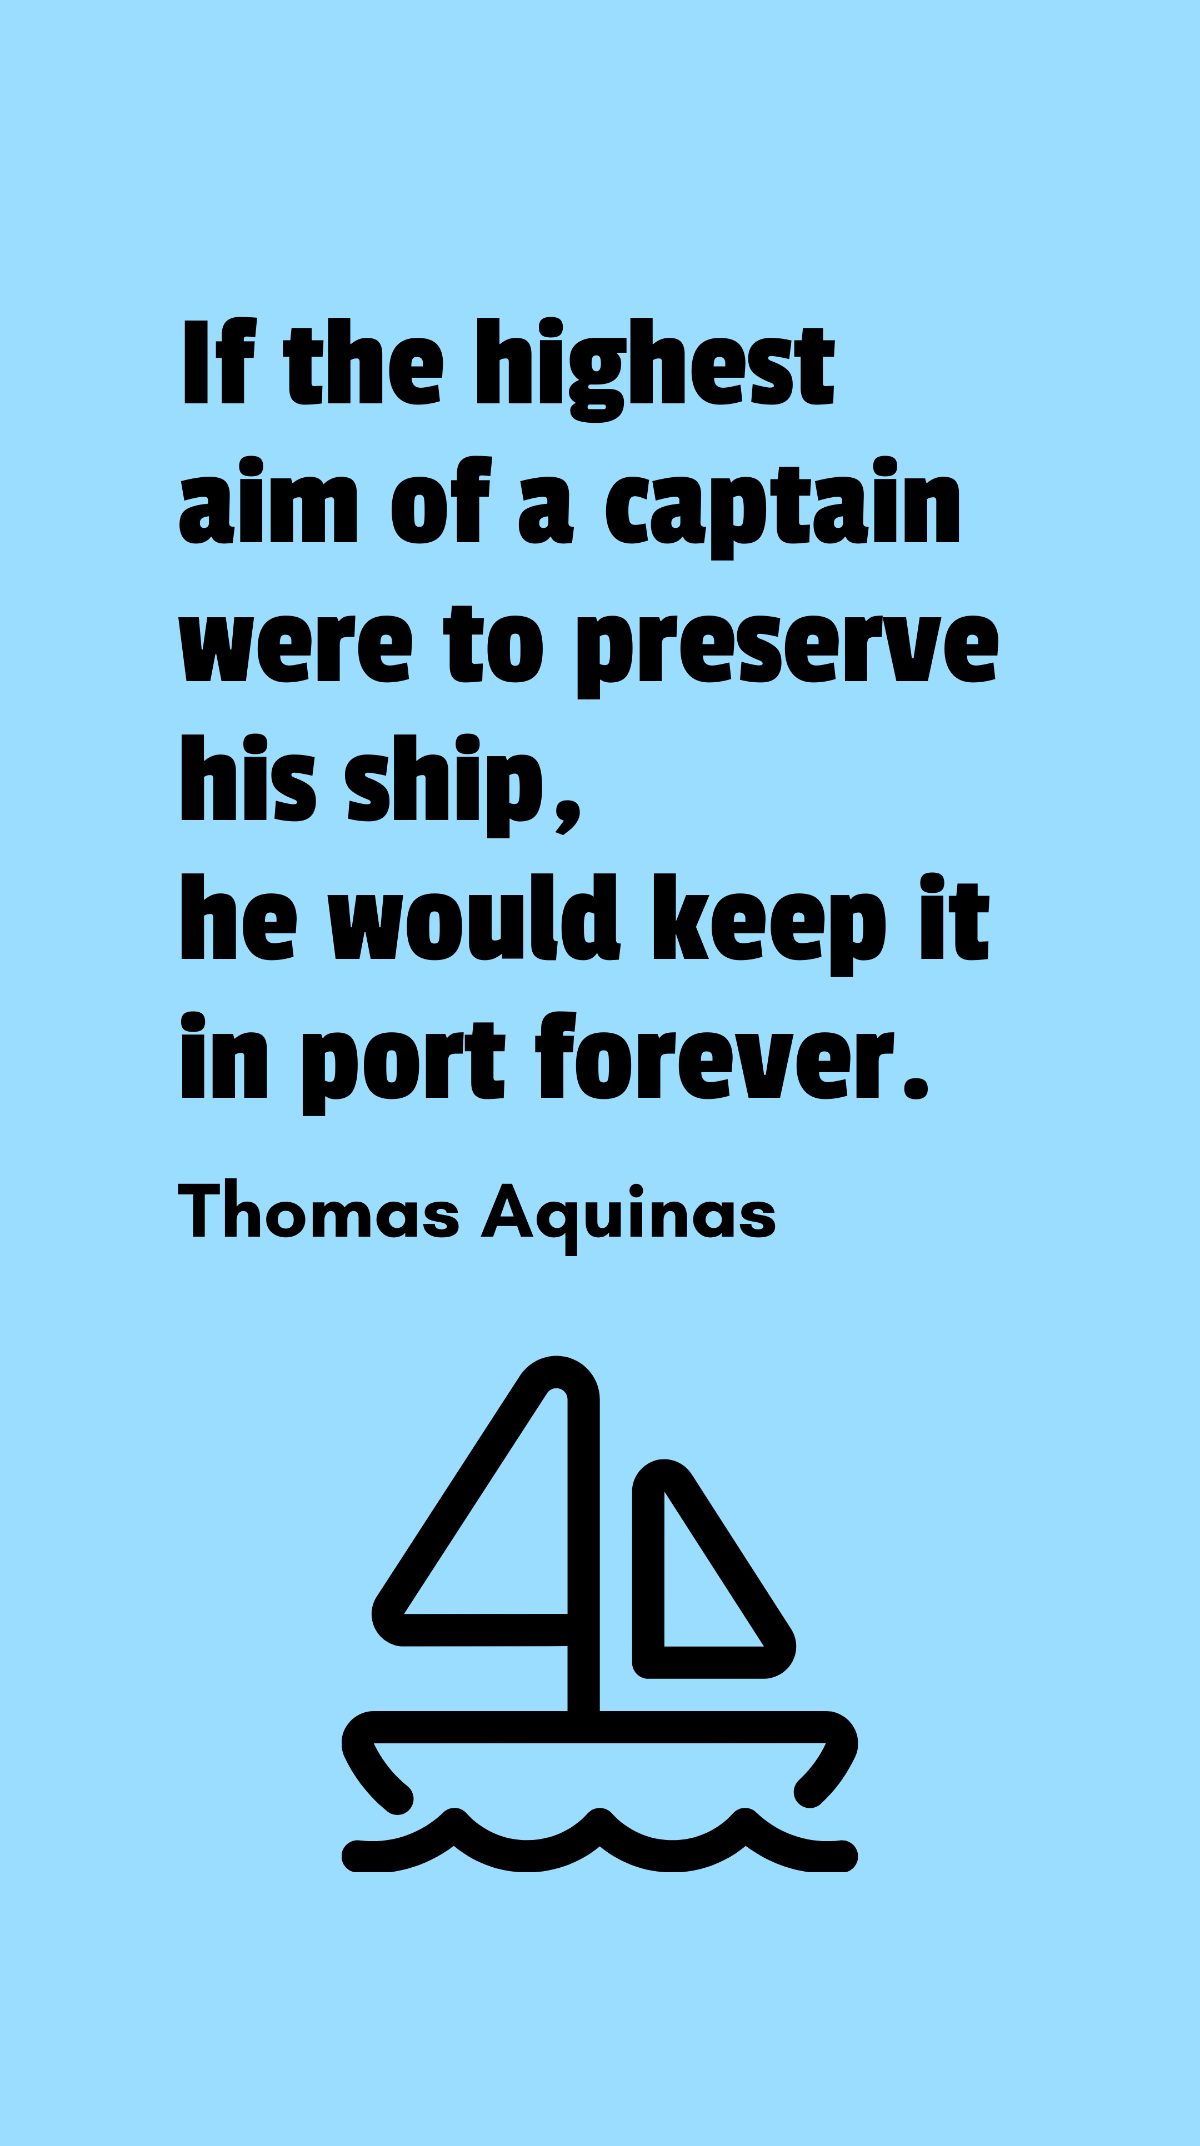 Thomas Aquinas - If the highest aim of a captain were to preserve his ship, he would keep it in port forever. Template